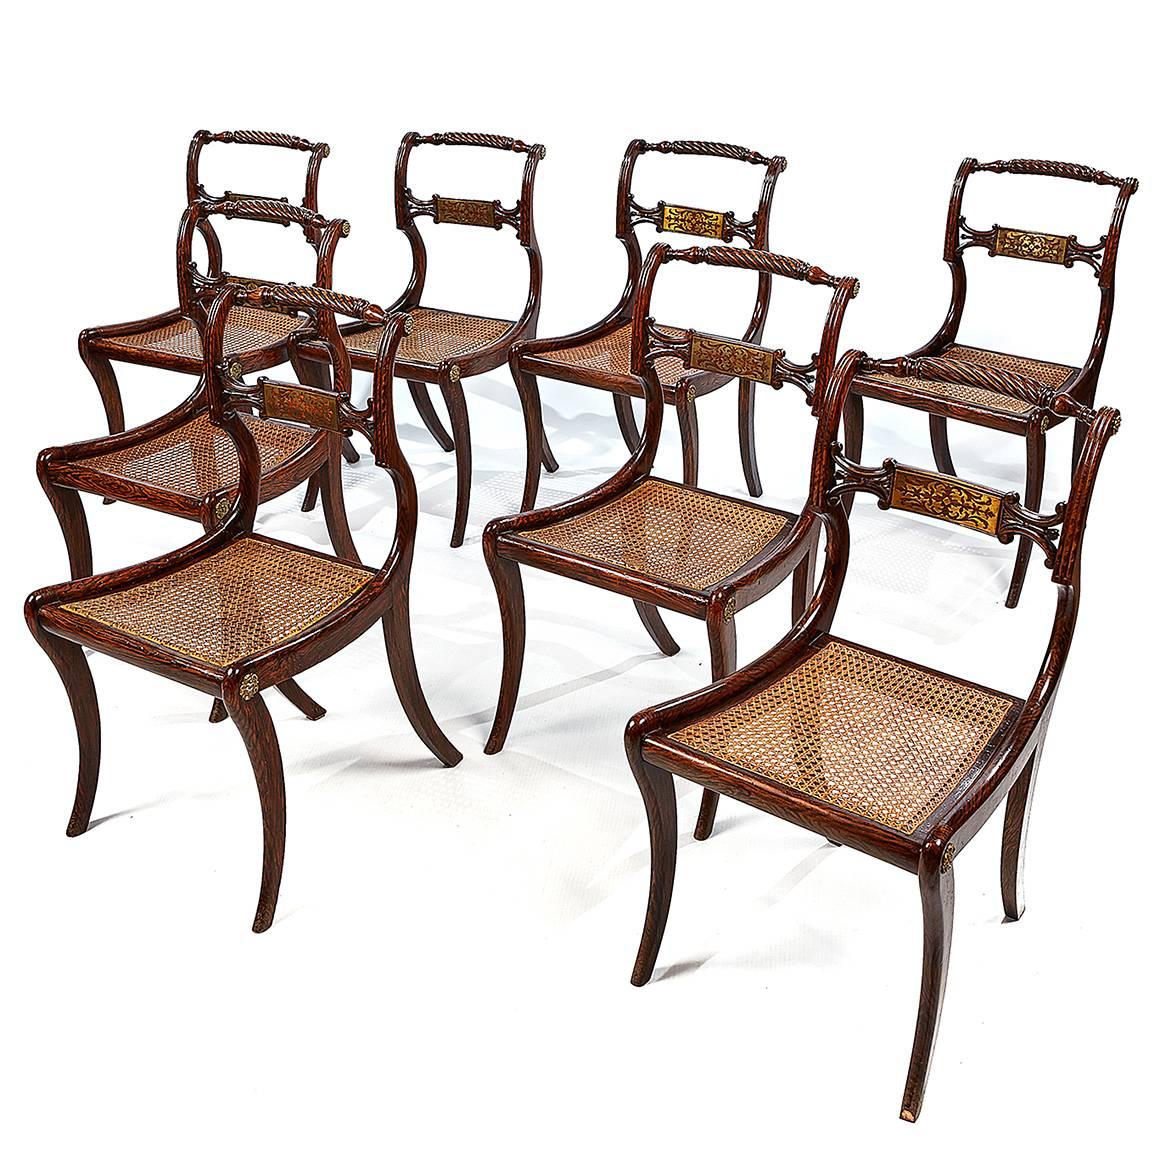 Each dining chair in this set of eight features a simulated rosewood turned and carved rope-twist crest rail ending in brass rosettes, above a brass-inlaid back rail. With a cushion atop a cane seat and sabre legs.